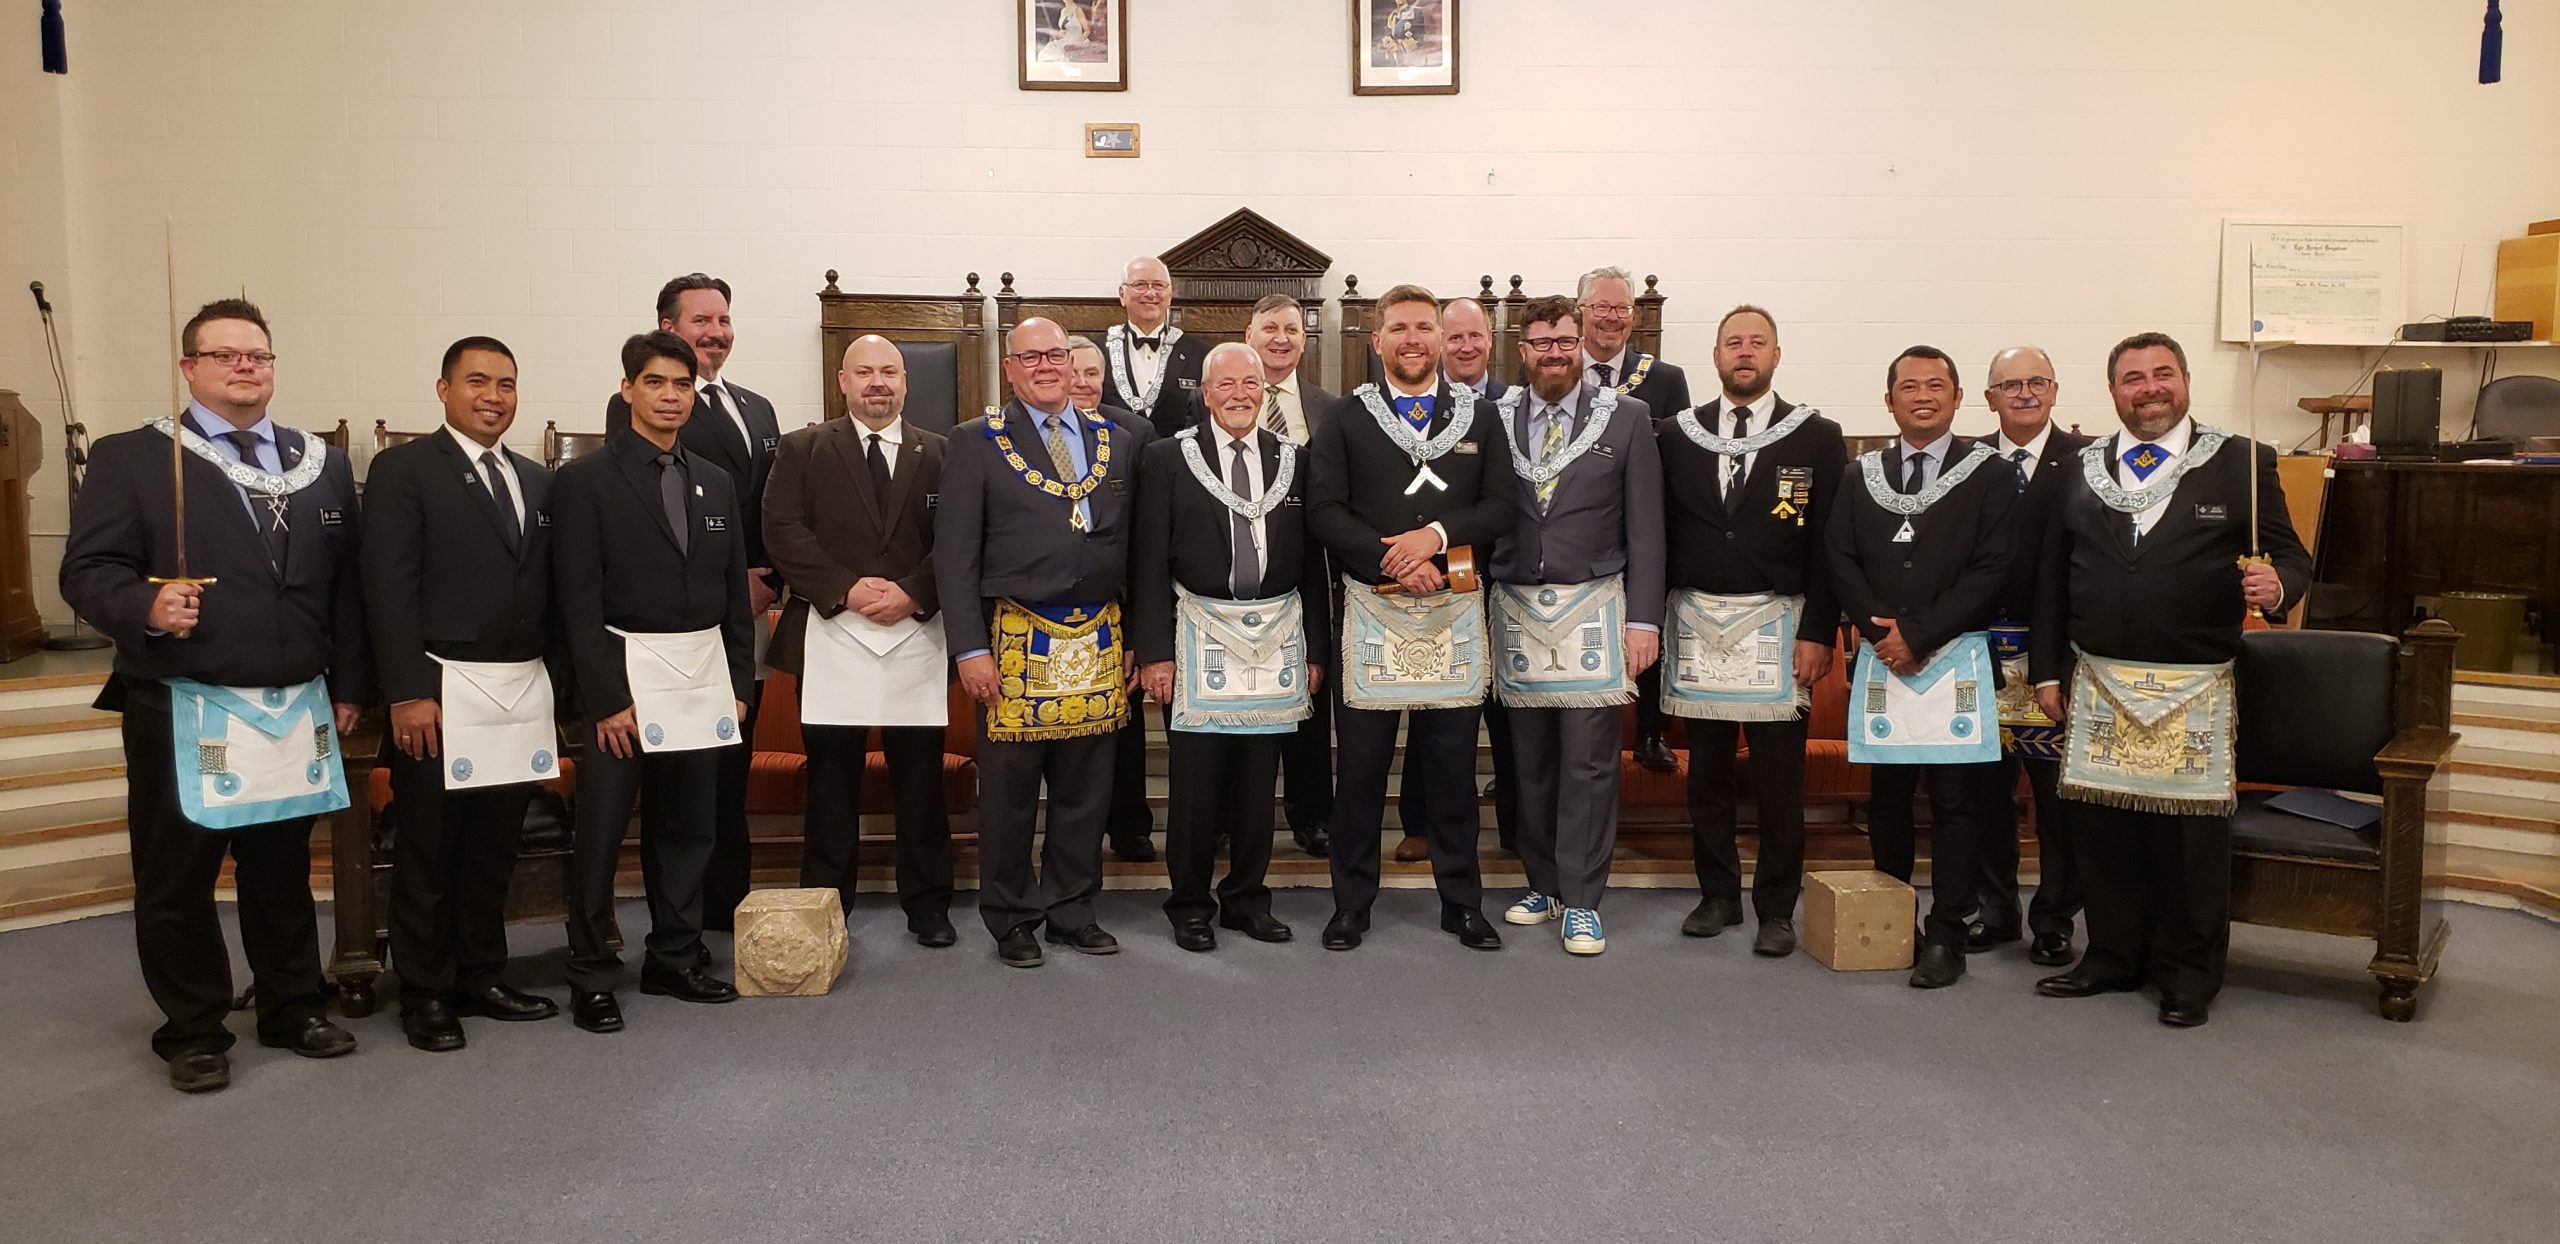 Officers of Mystic Tie Lodge No. 213 for 2020